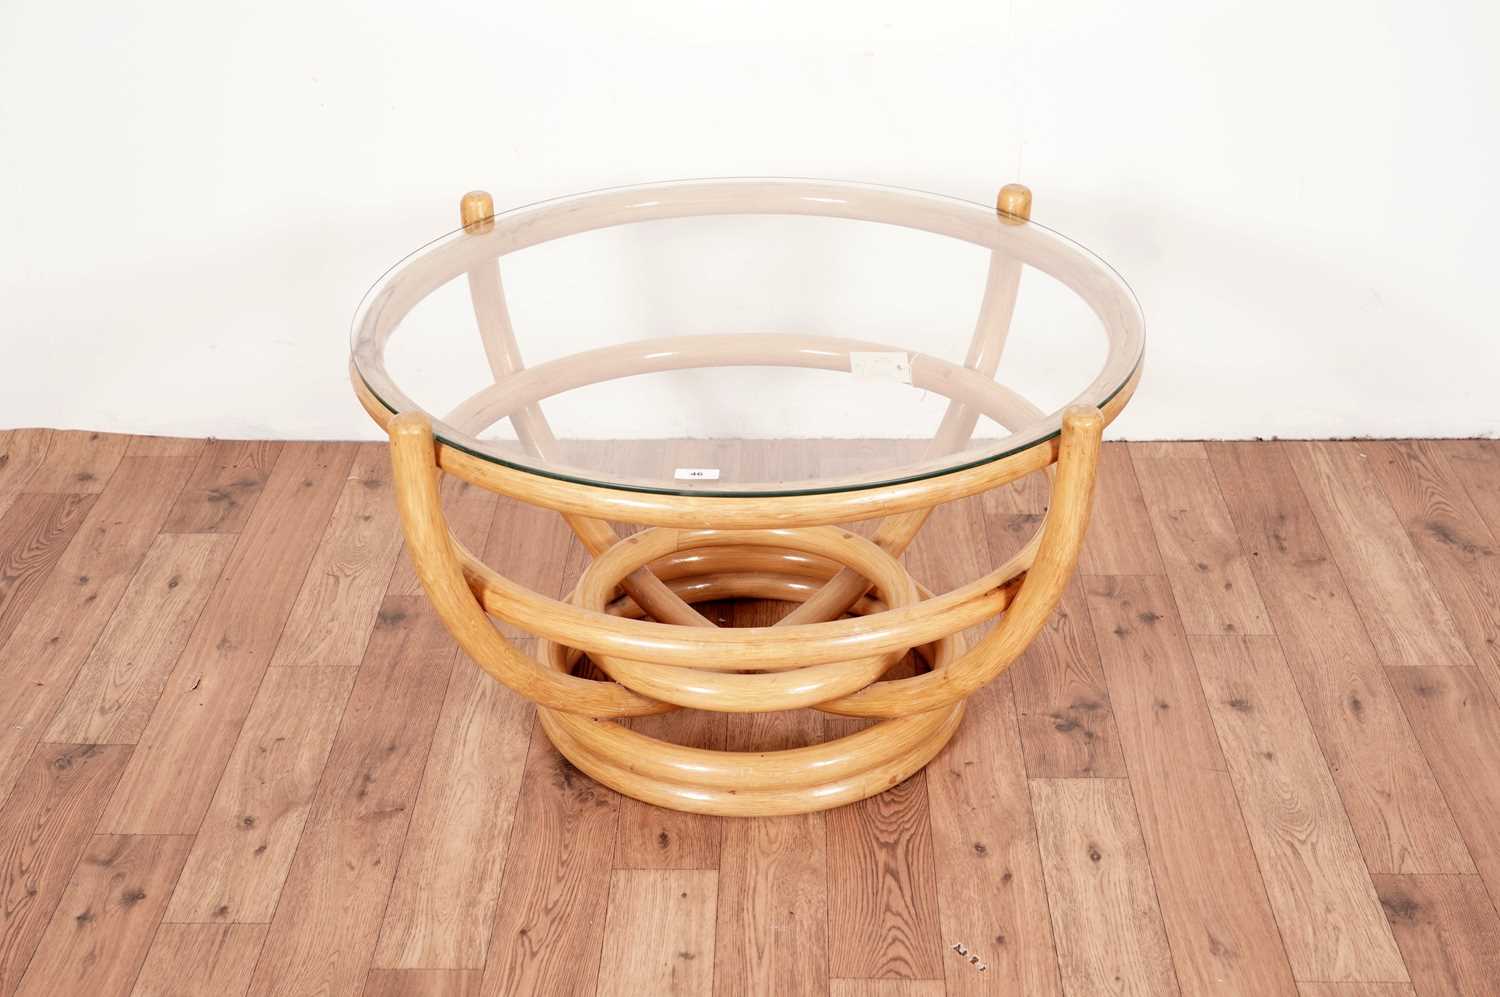 Angrave's: An 'invincible' bamboo and glass coffee table